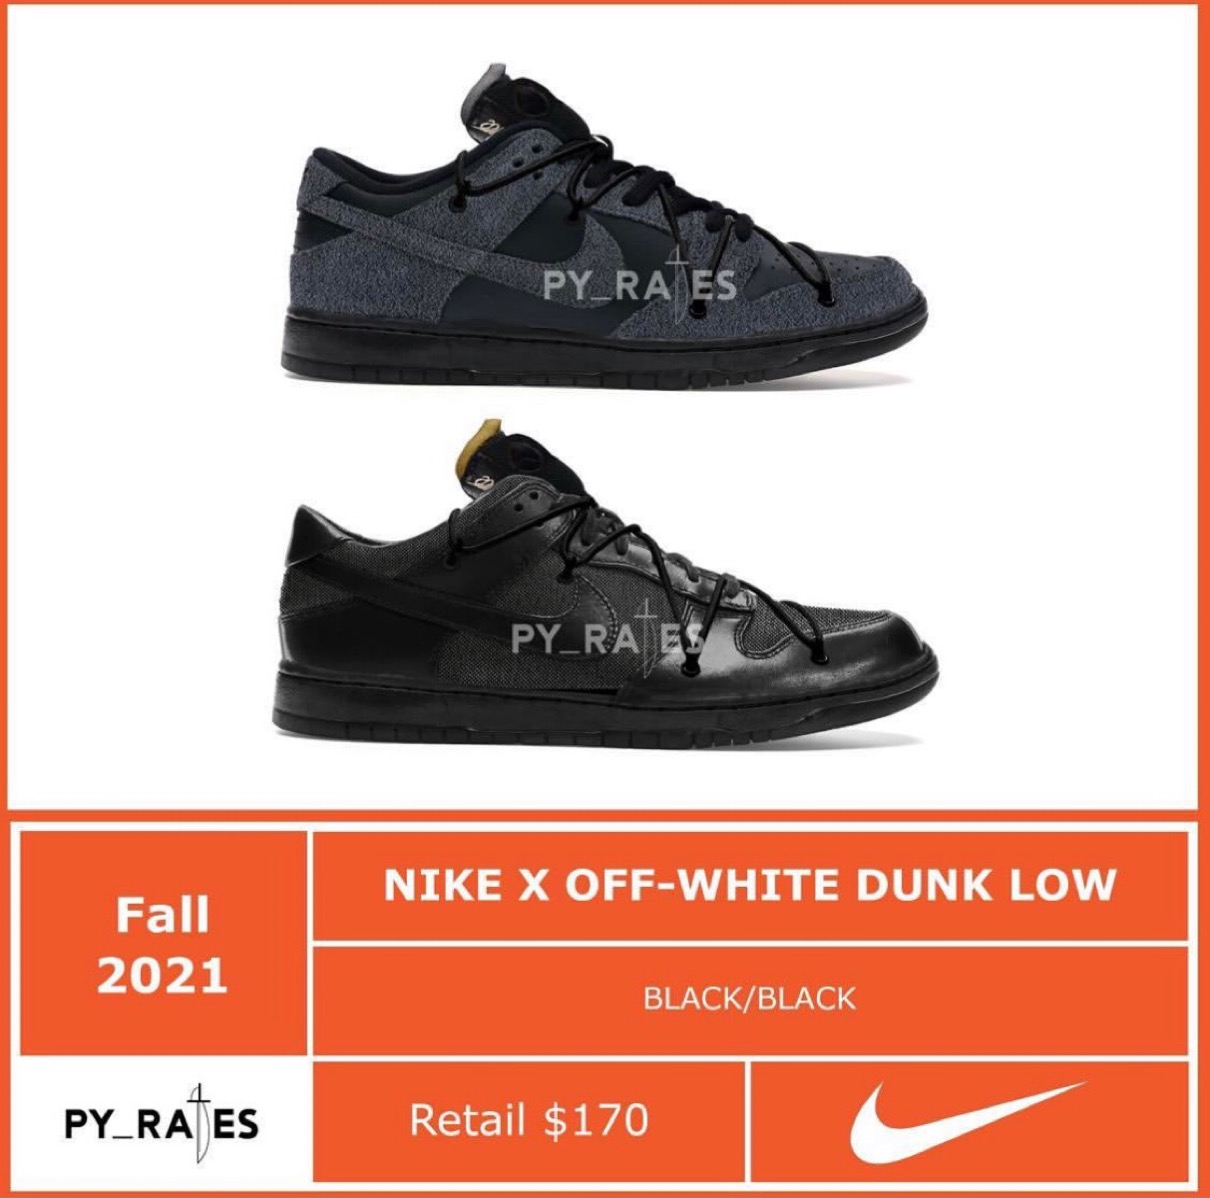 Nike × Off-White】Dunk Low “Black”が2021年秋に発売予定 | UP TO DATE